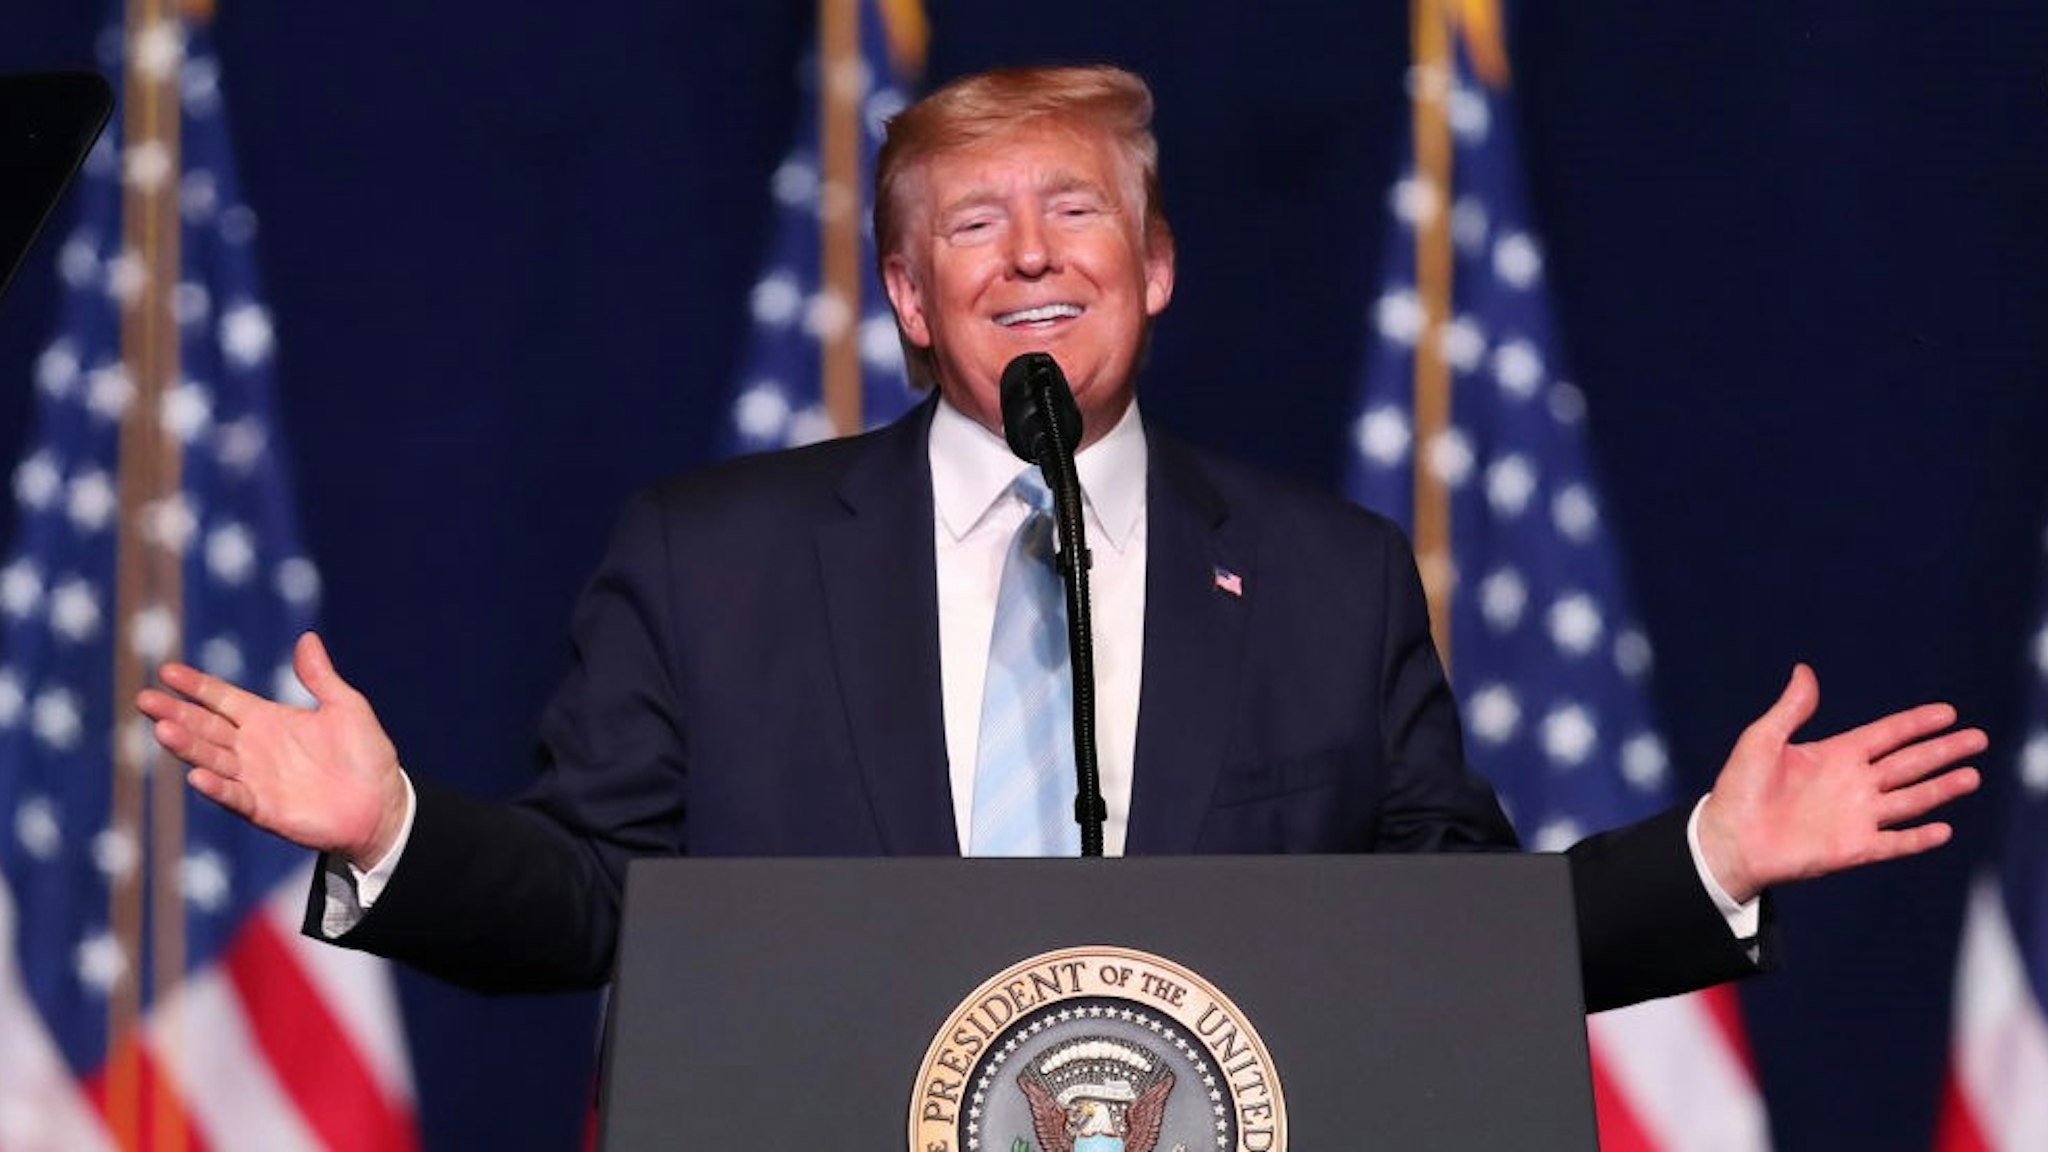 President Donald Trump speaks during a 'Evangelicals for Trump' campaign event held at the King Jesus International Ministry on January 03, 2020 in Miami, Florida. The rally was announced after a December editorial published in Christianity Today called for the President Trump's removal from office.